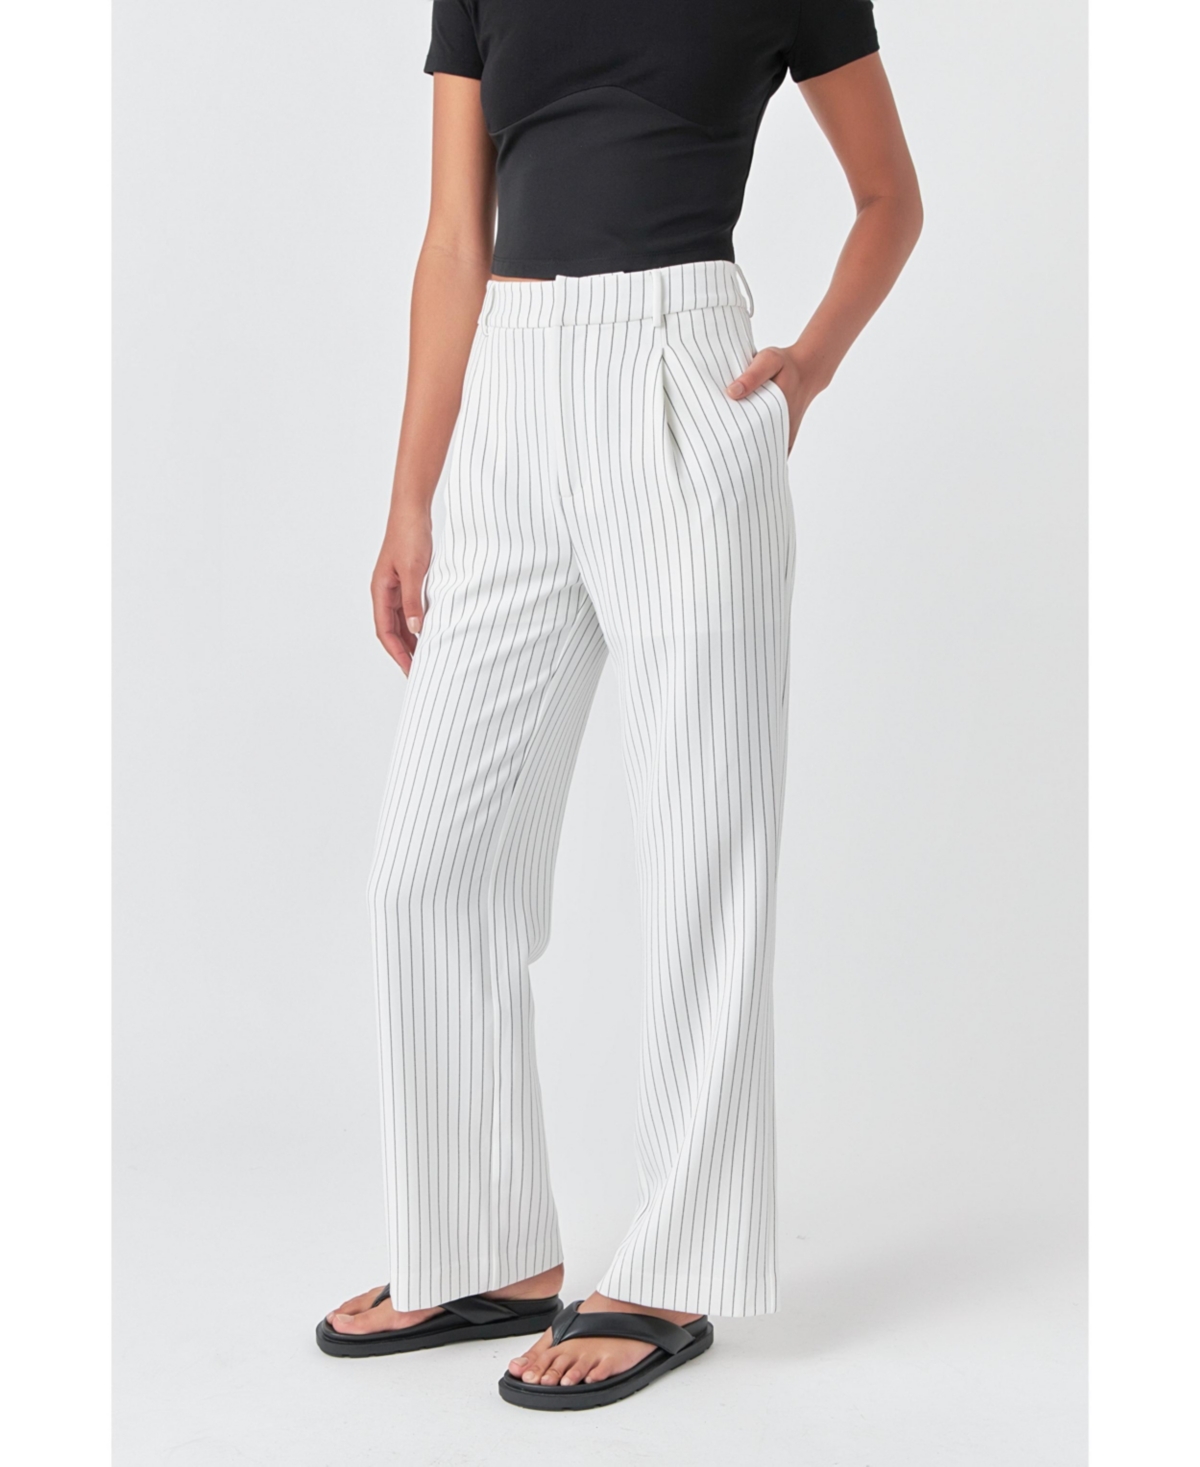 Women's Pinstriped High Waisted Wide Trousers - White black stripe